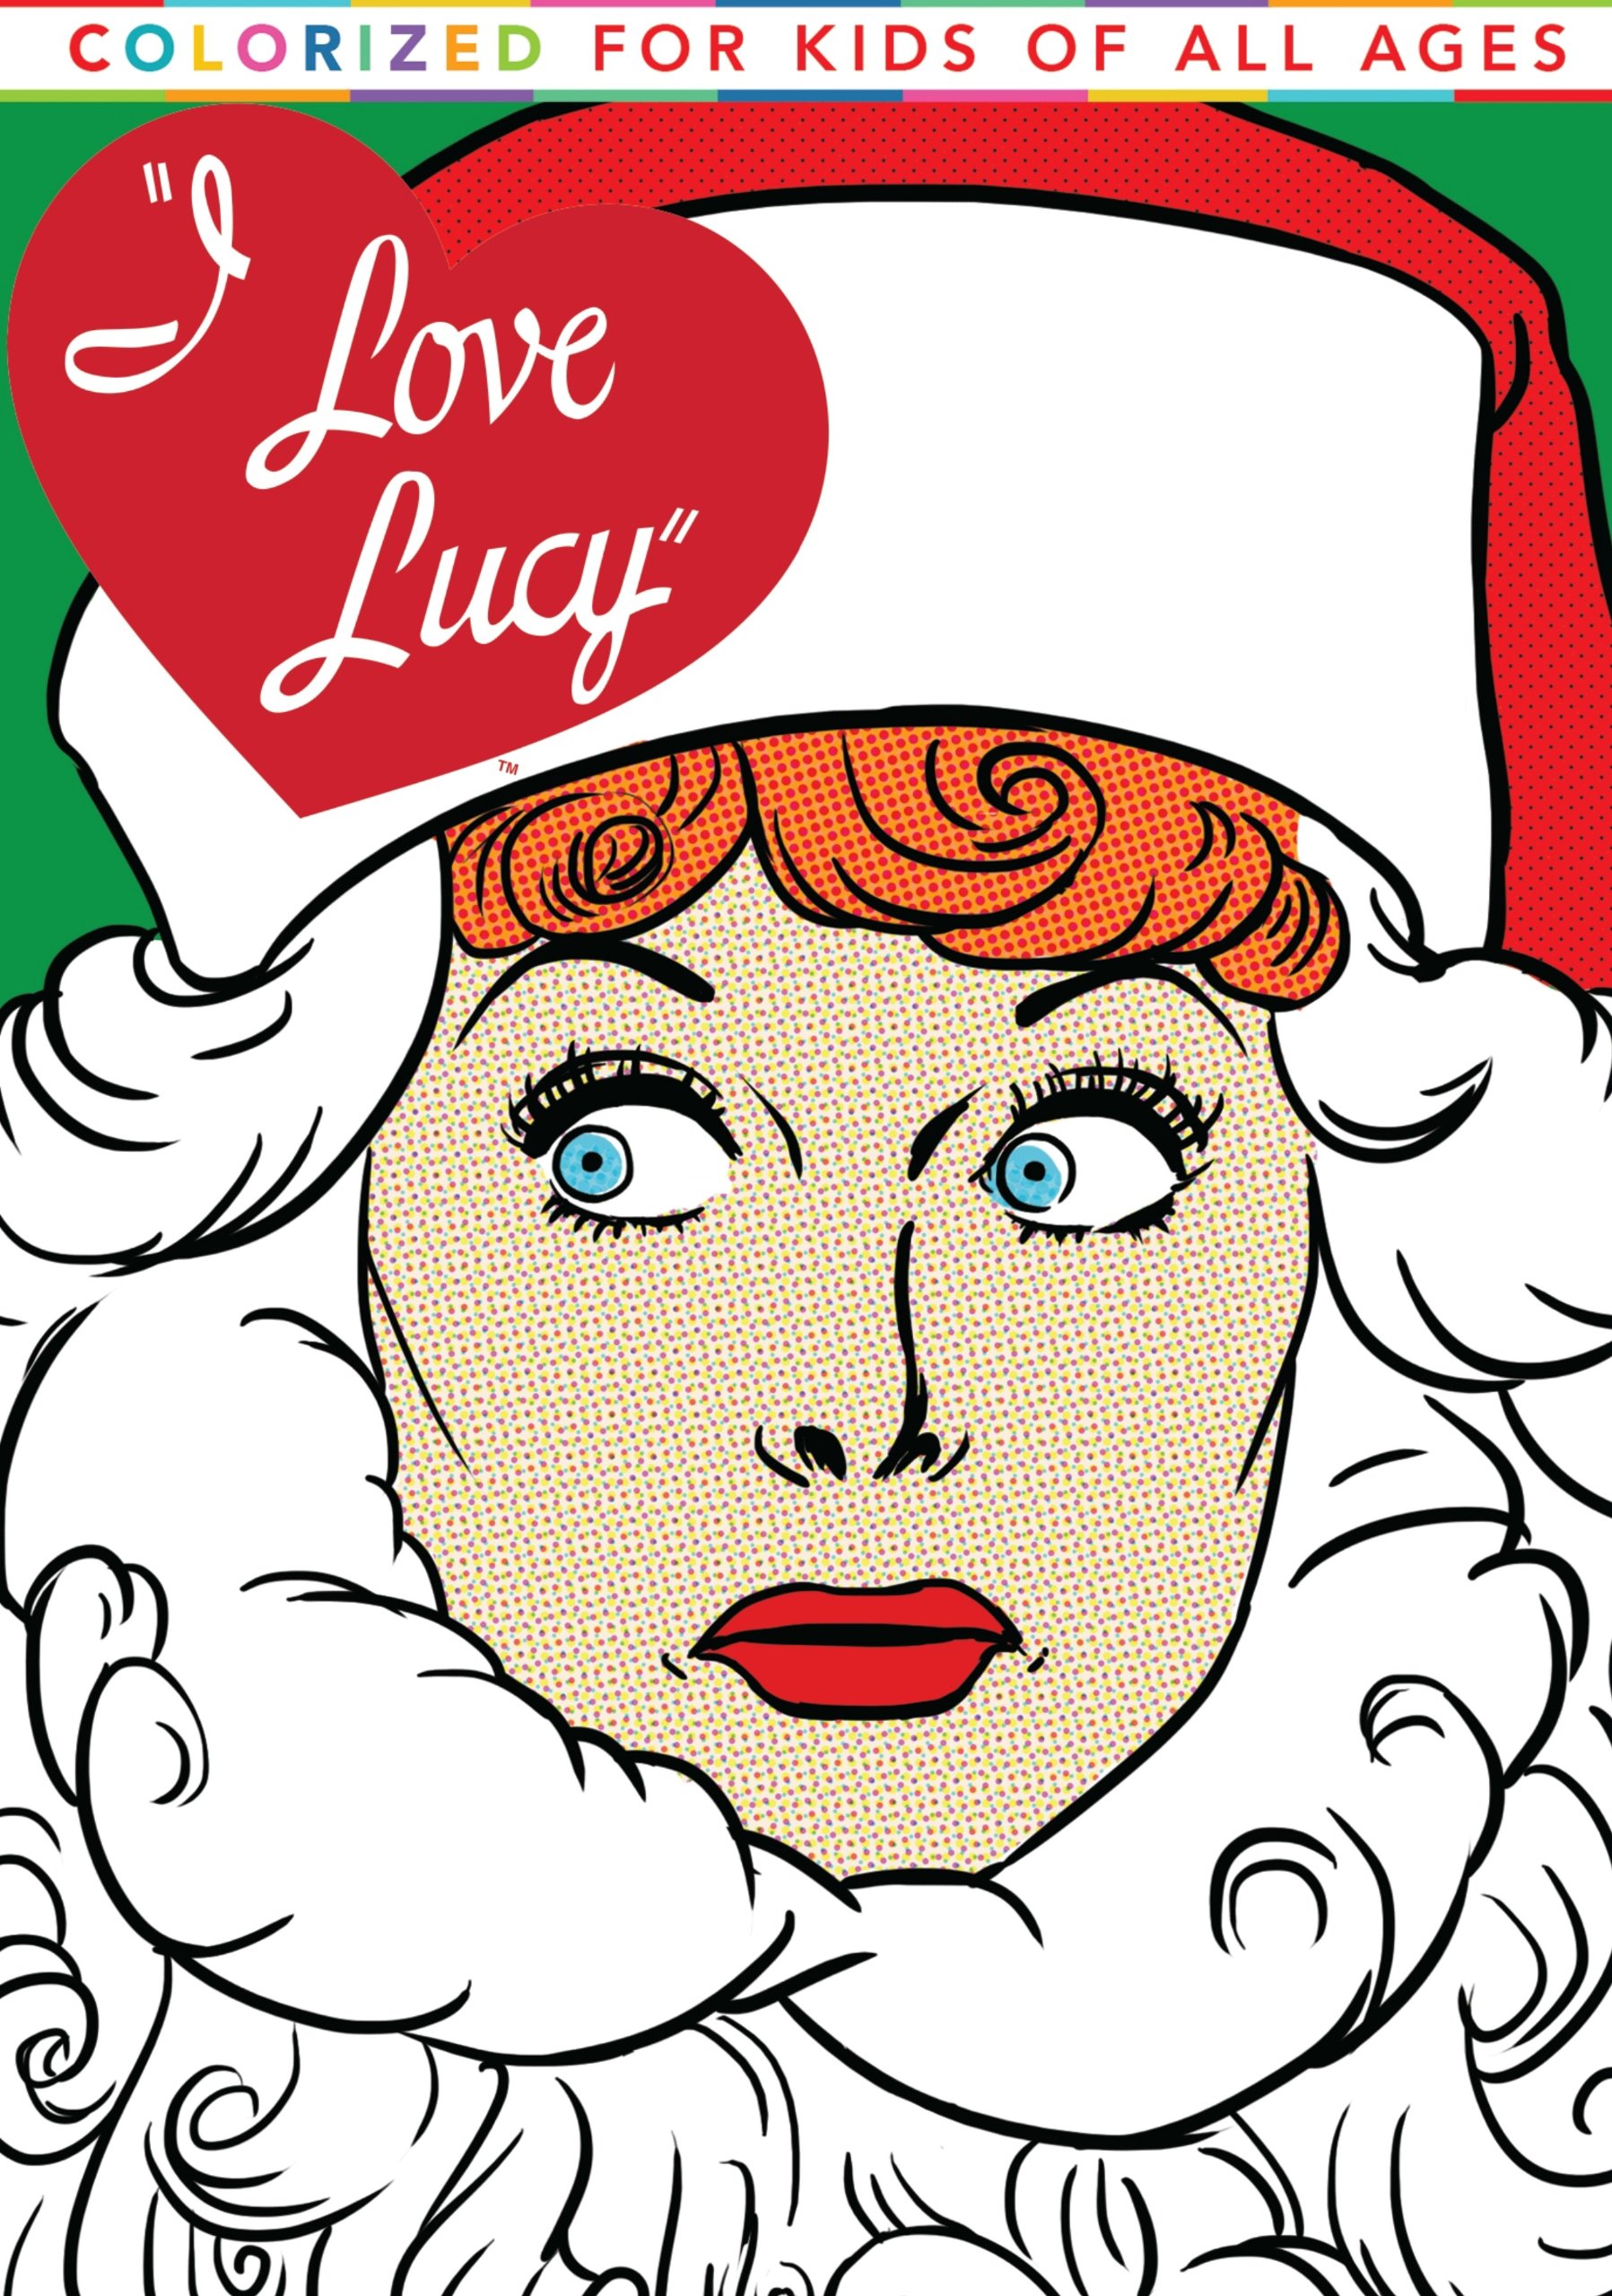 Book Cover The I Love Lucy Christmas Special - Colorized For Kids of All Ages